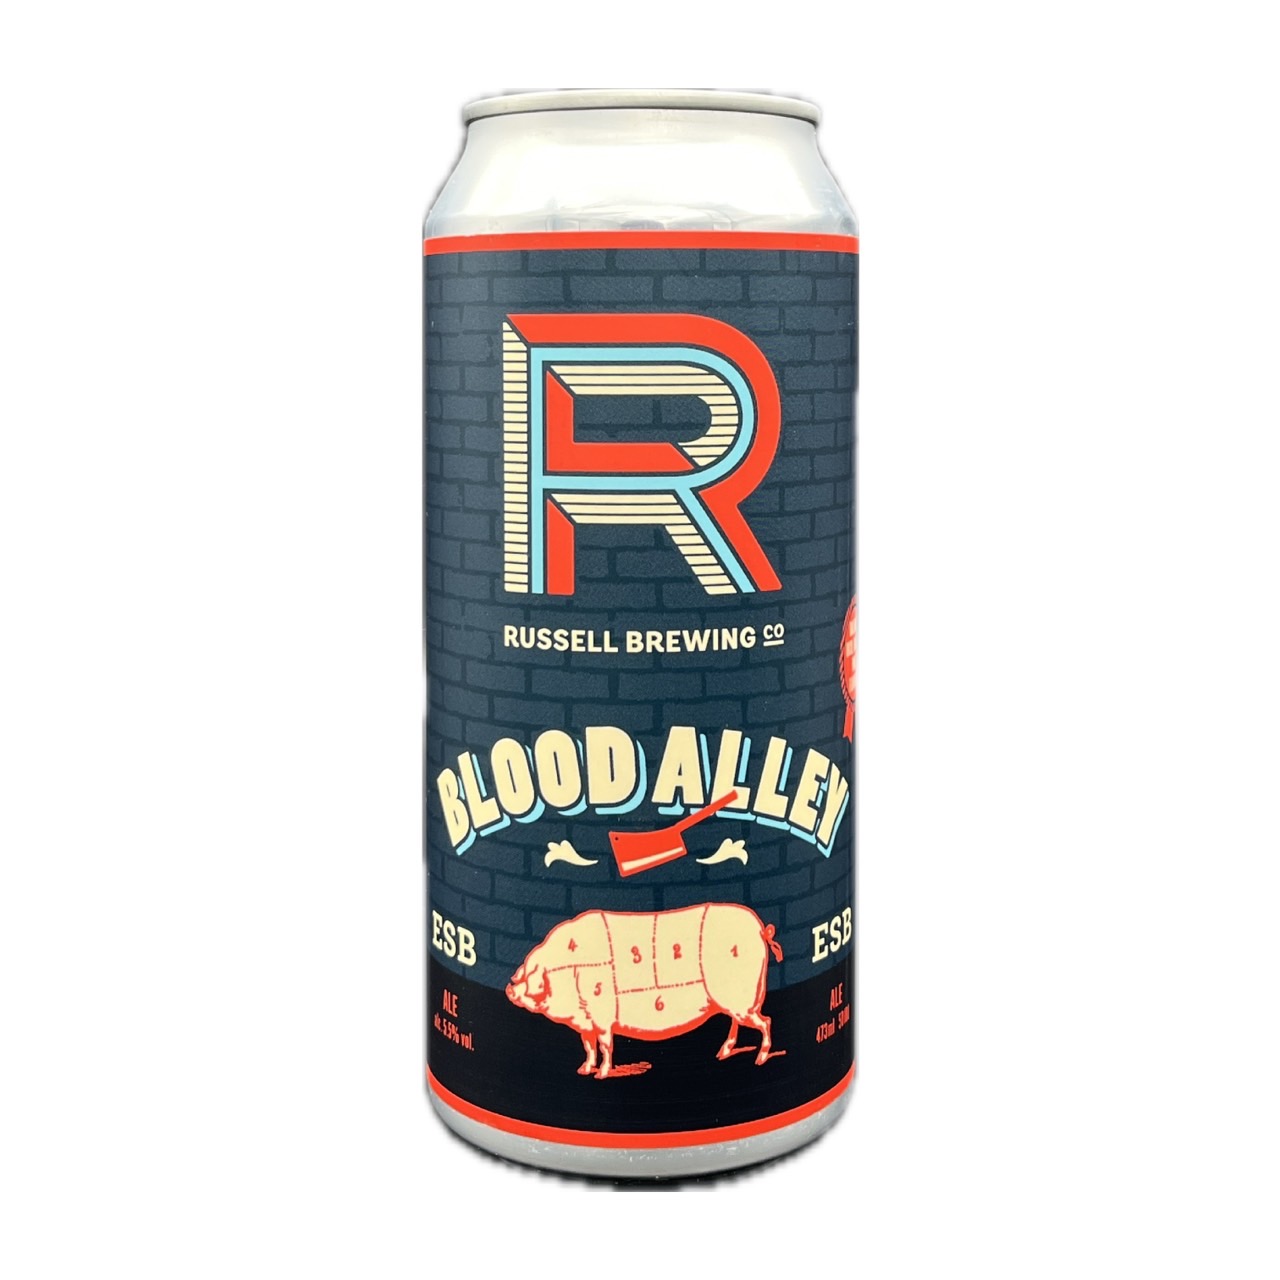 ☆Blood Alley ESB/RUSSELL BREWING CO.